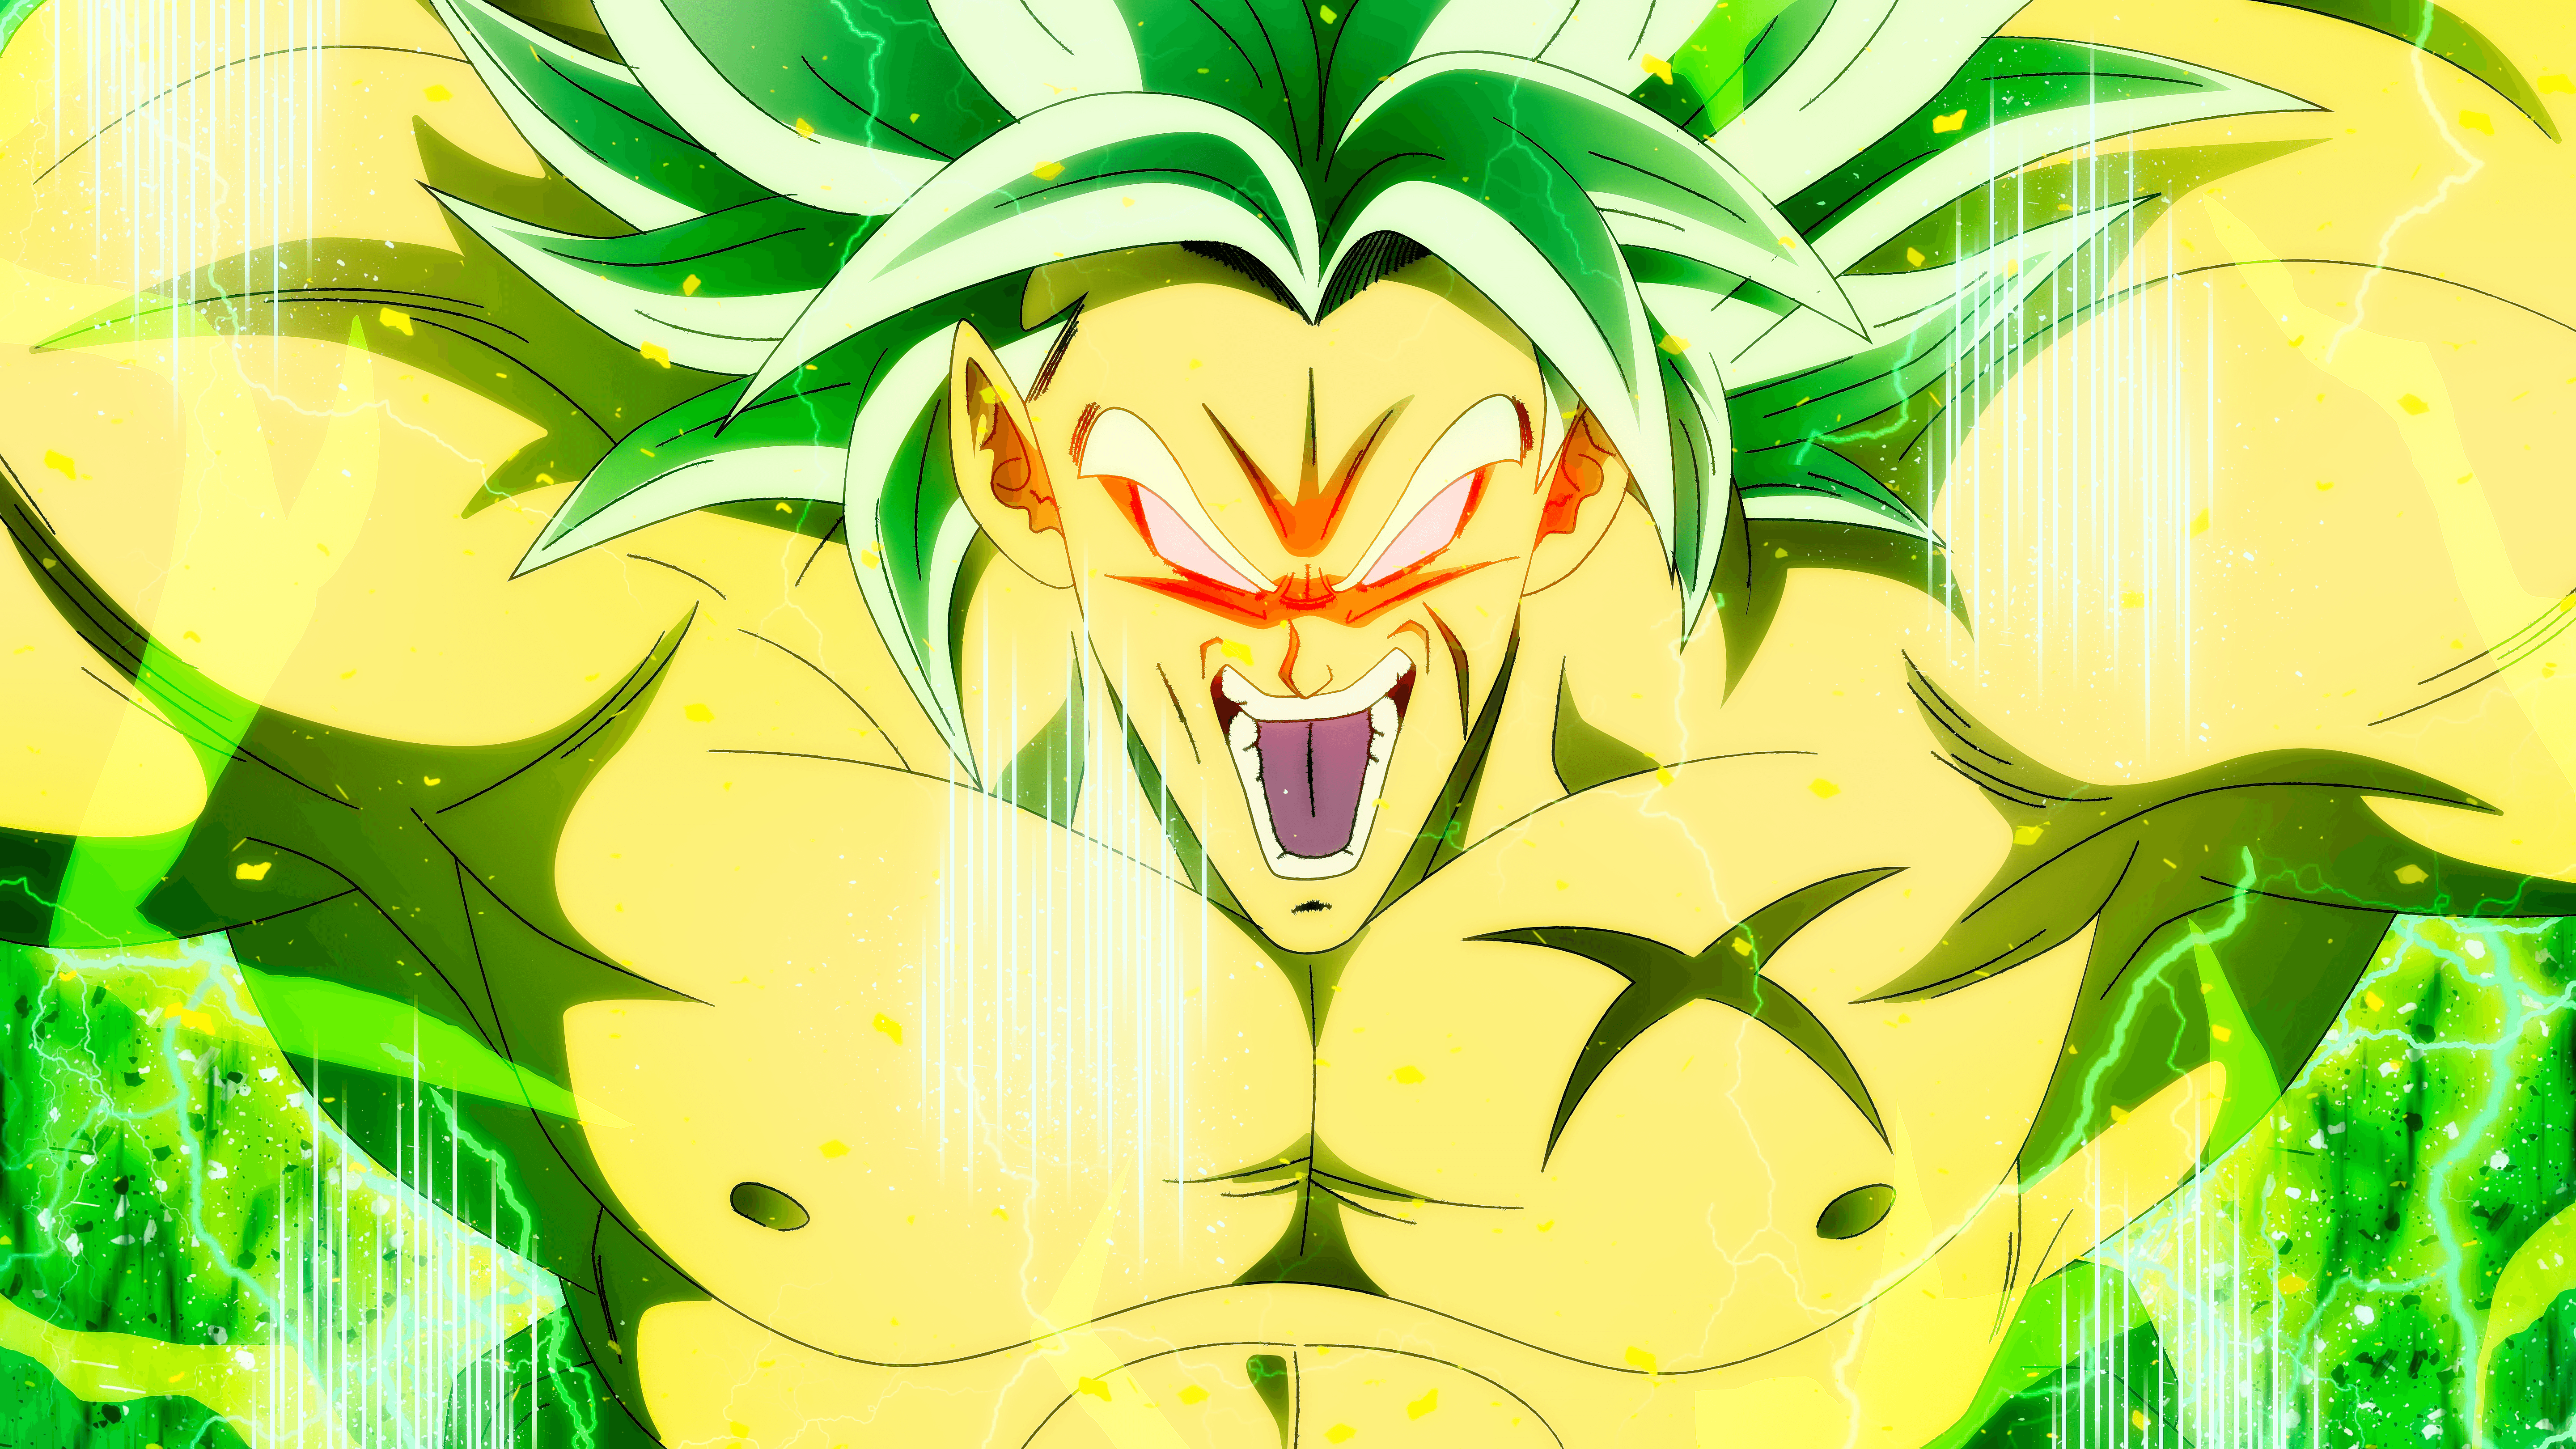 2932x2932 Dragon Ball Super Broly Movie 2019 Ipad Pro Retina Display HD 4k  Wallpapers, Images, Backgrounds, Photos and Pictures